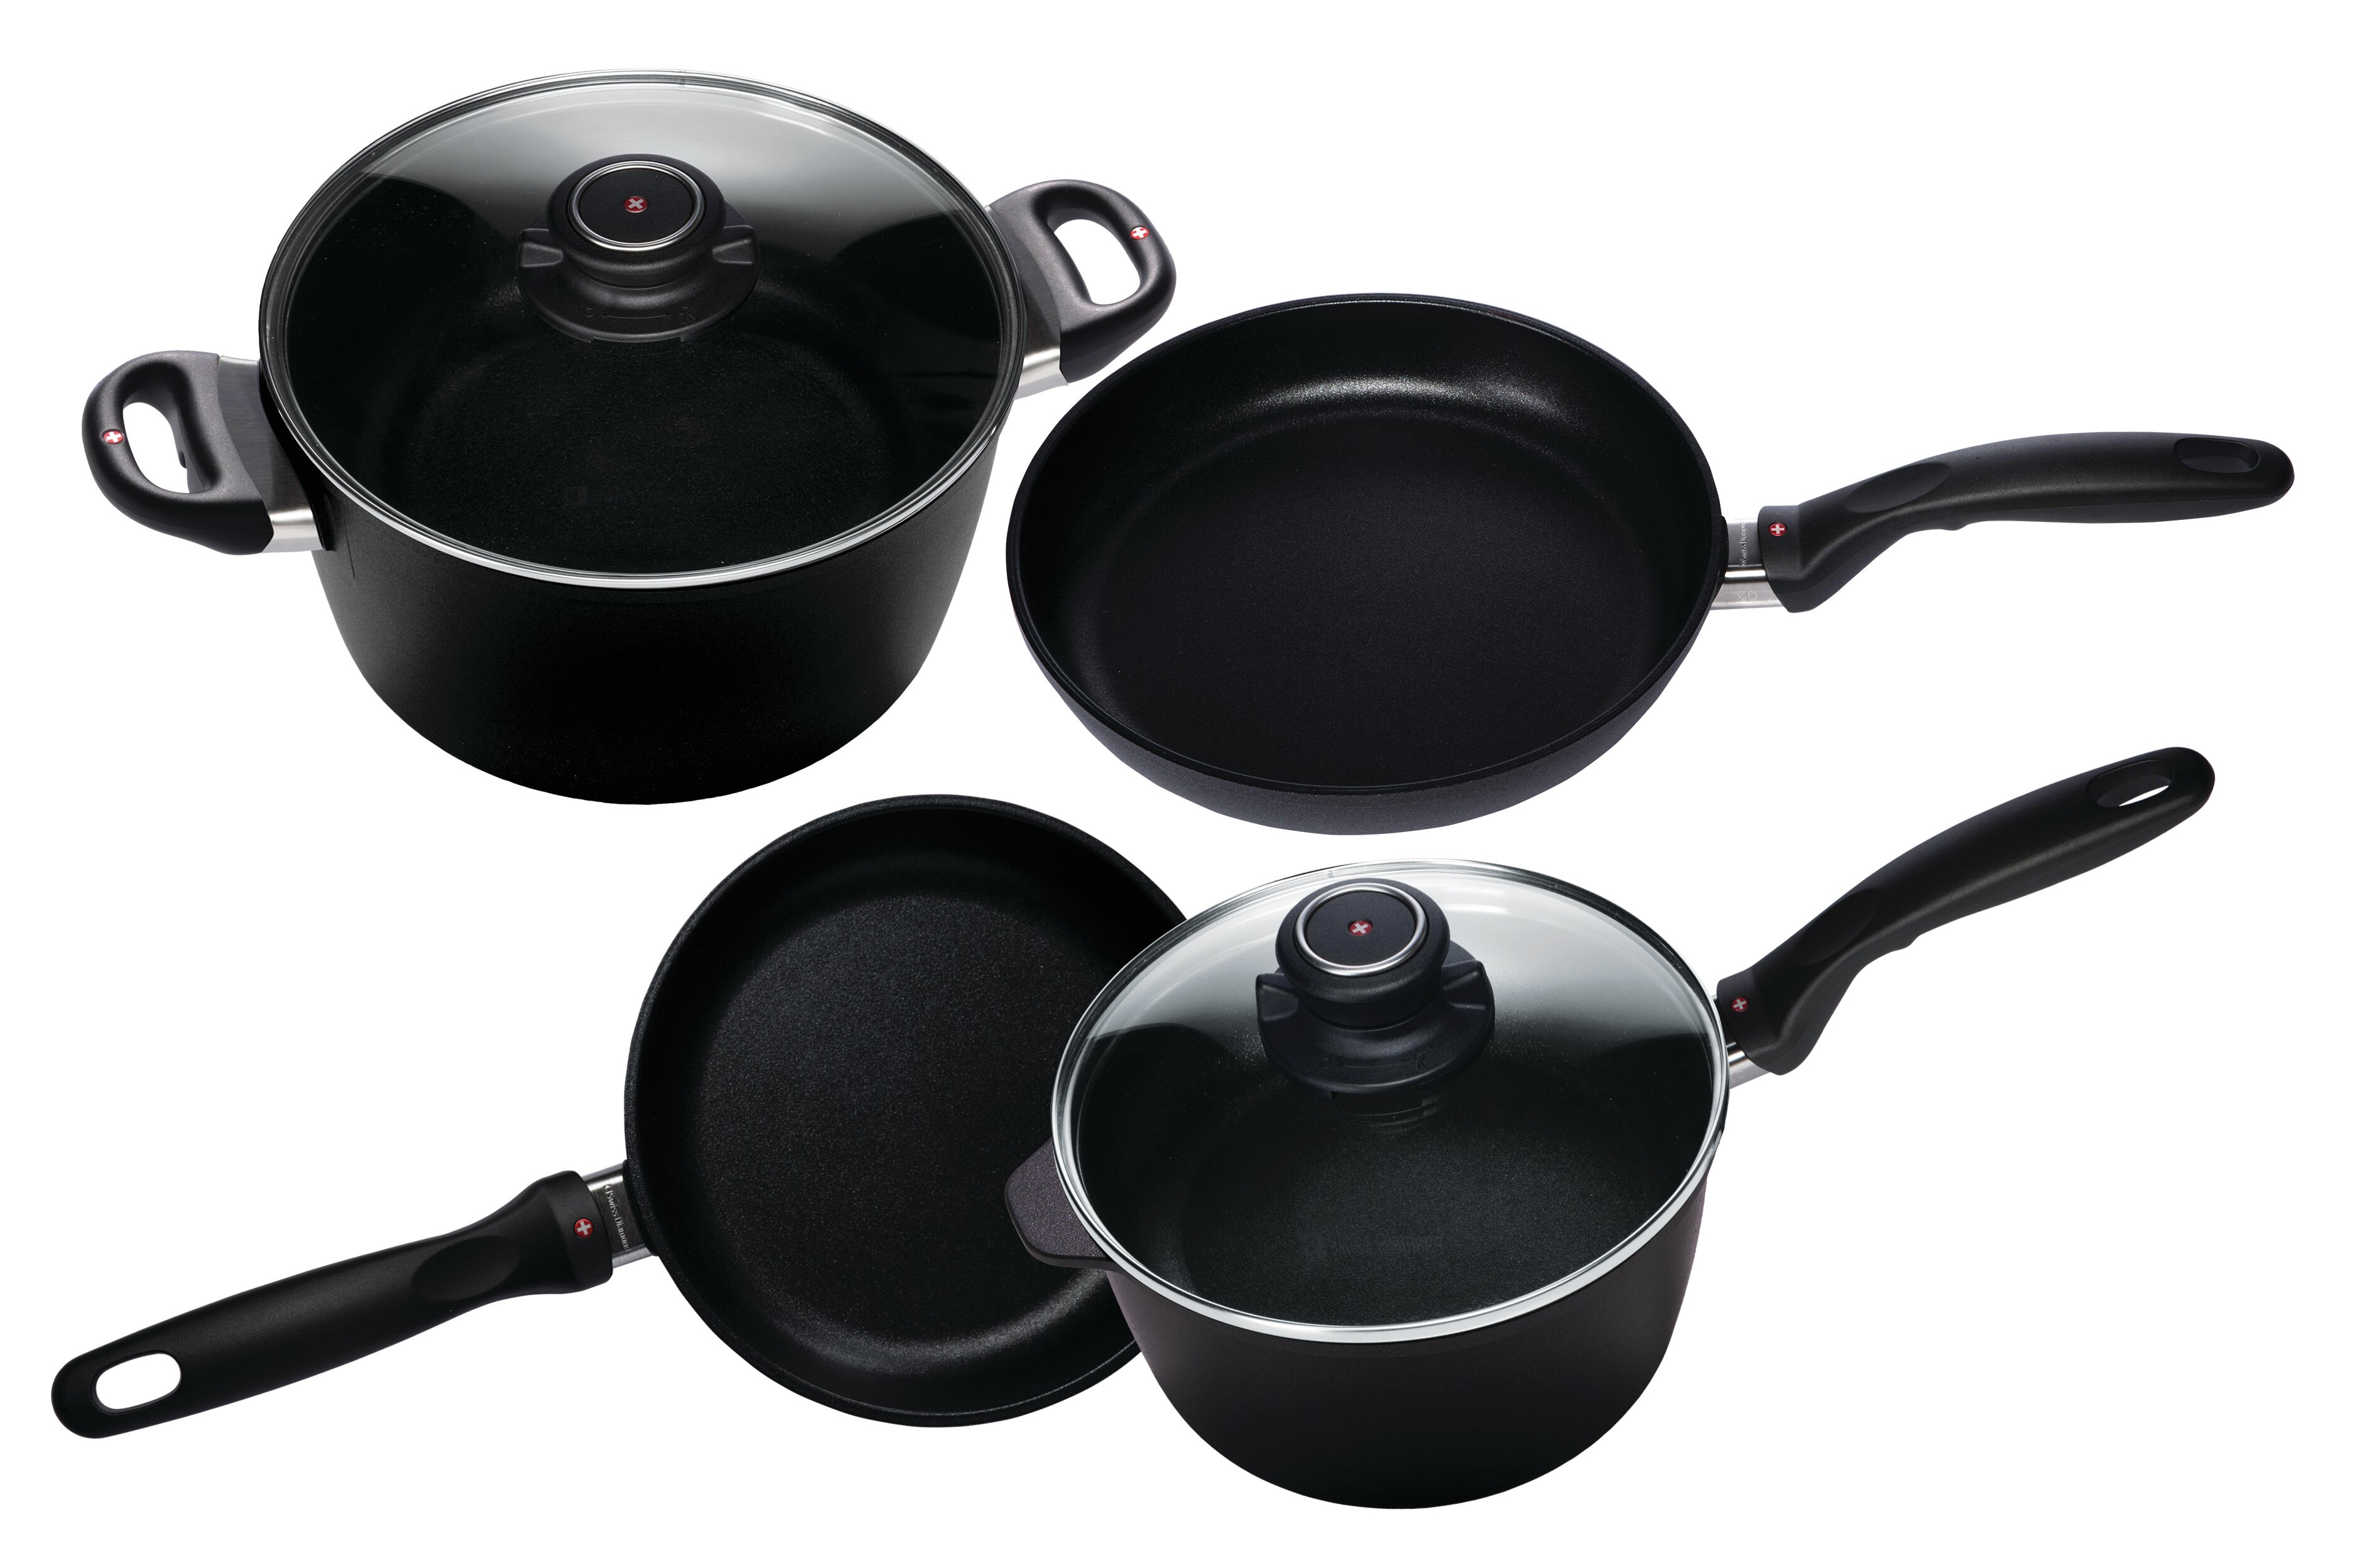 Toughened Non-Stick 5-Piece Cookware Set with Detachable Handle